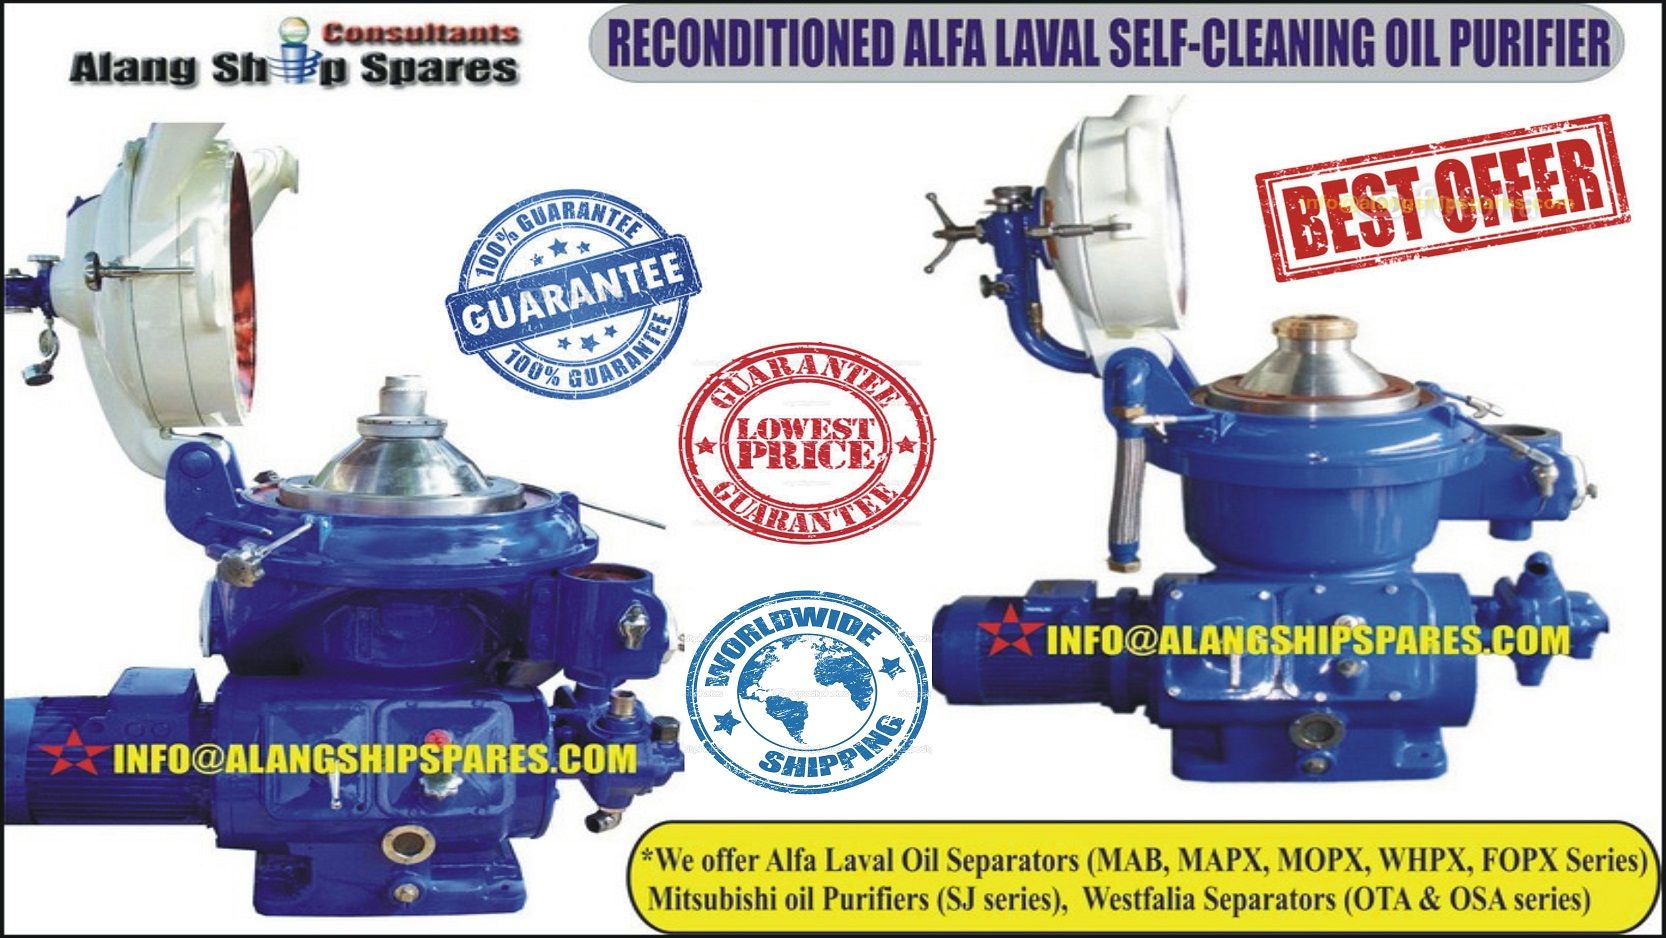 Alang Ship Spares Consultant Main Image